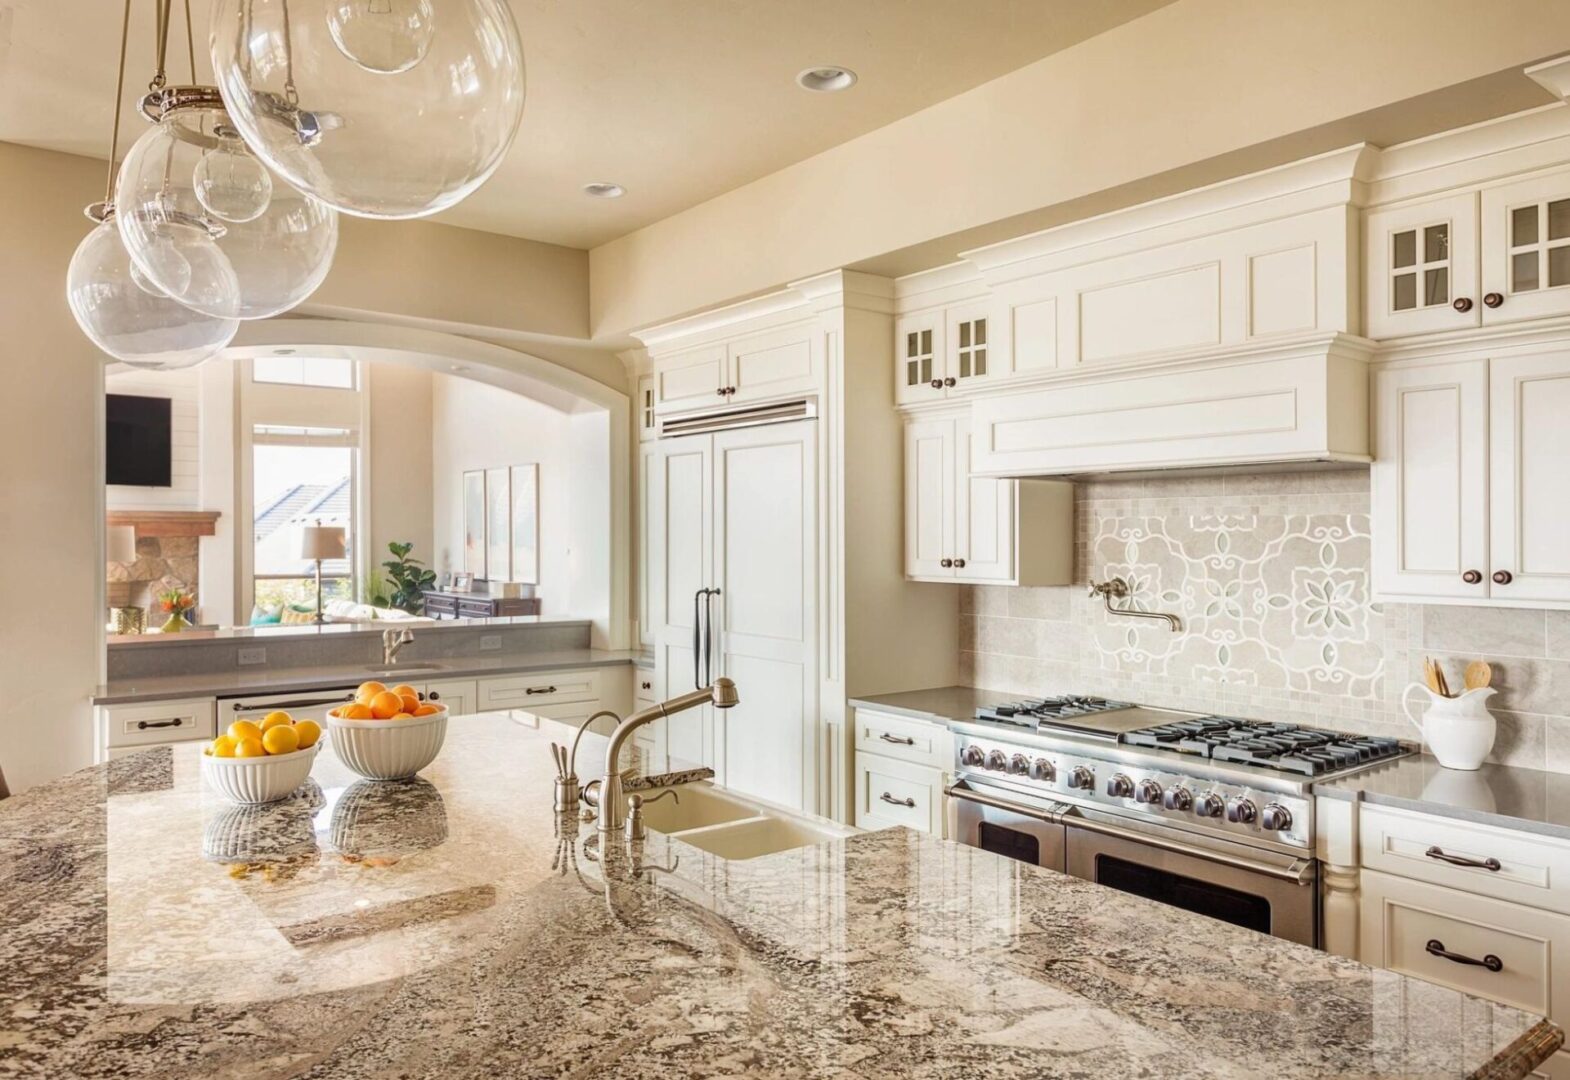 A bright, modern kitchen with white cabinetry, stainless steel appliances, and a marble countertop.